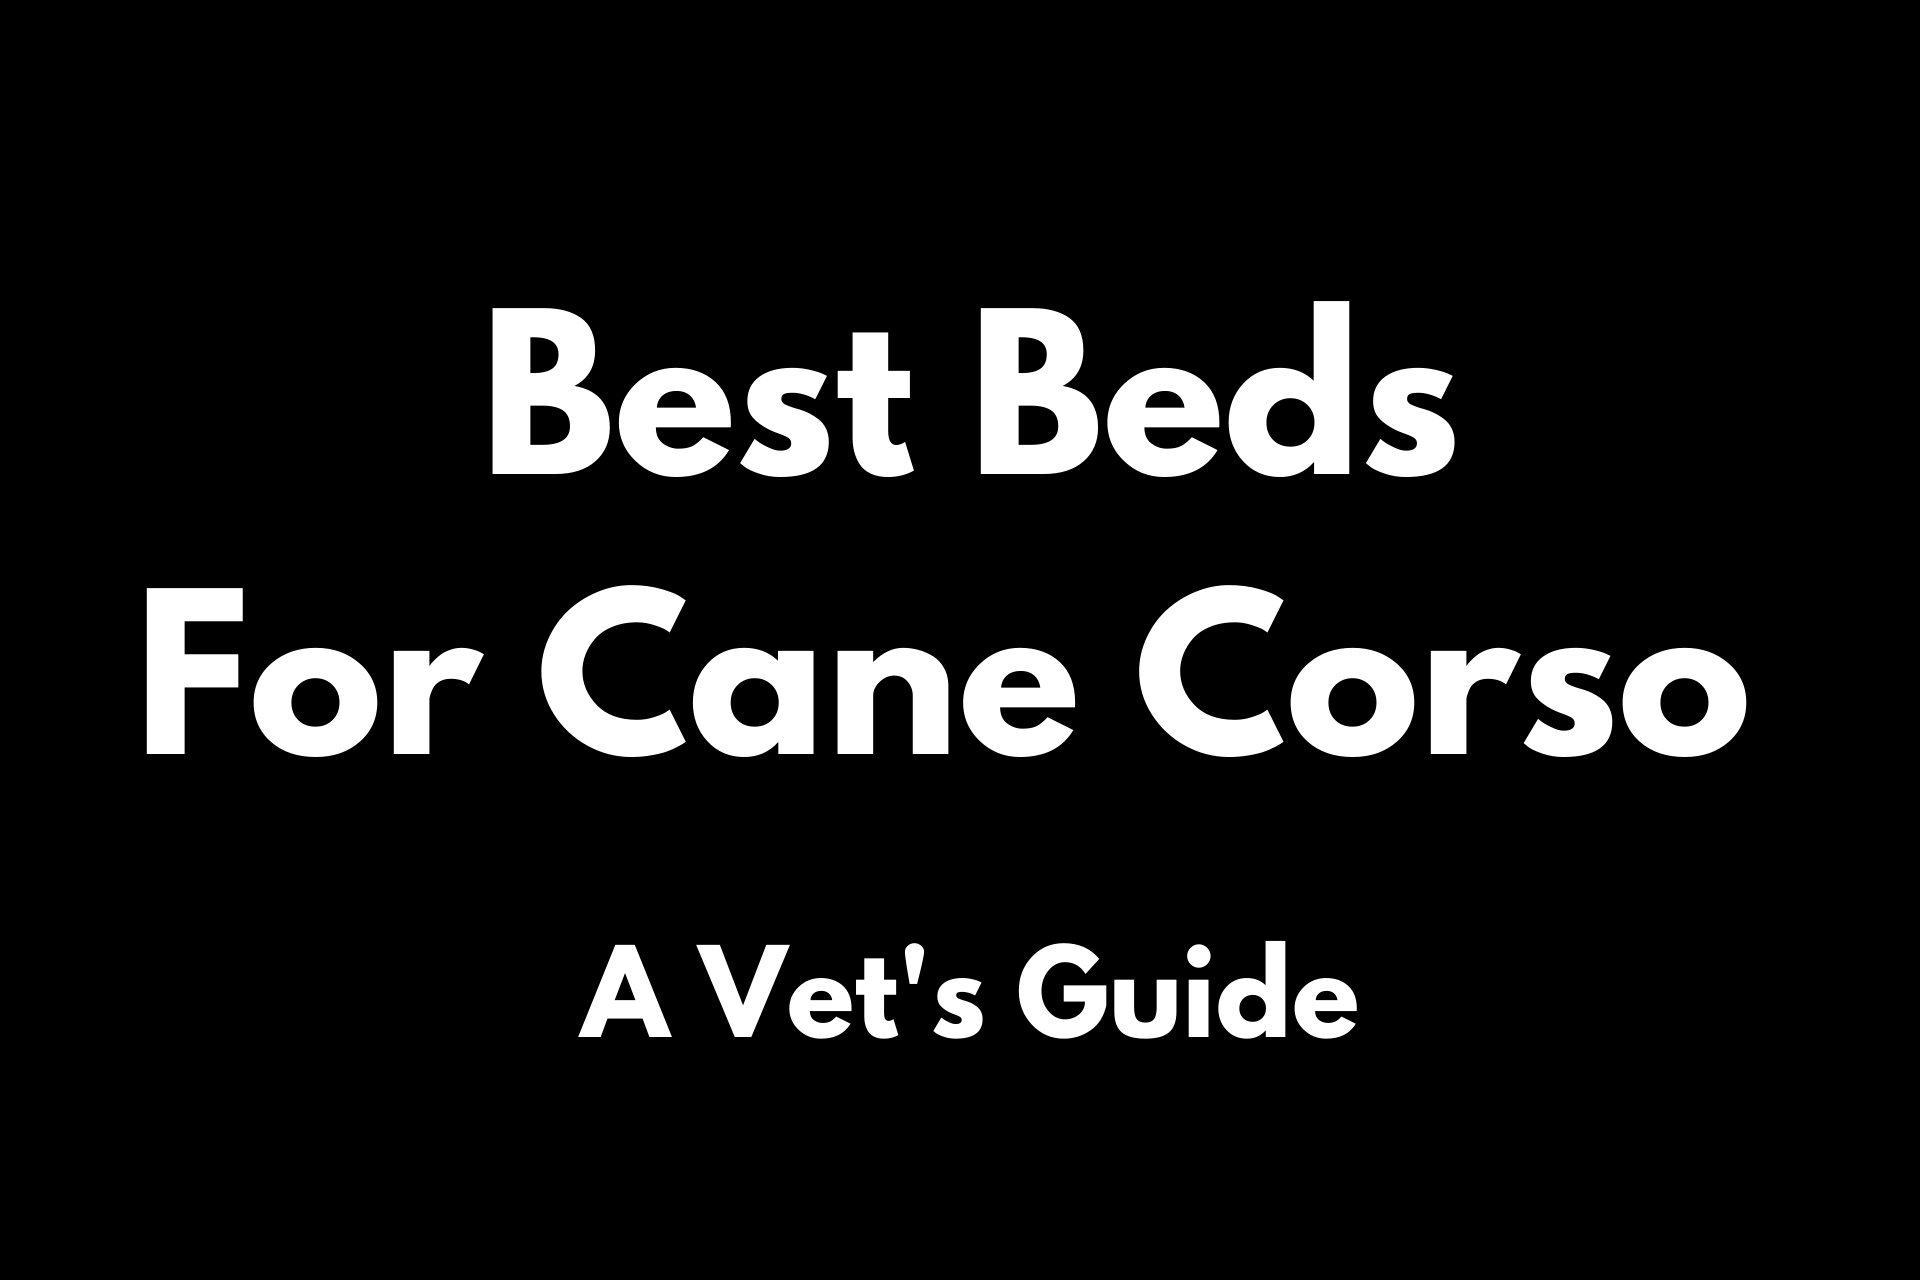 Best beds for cane corso